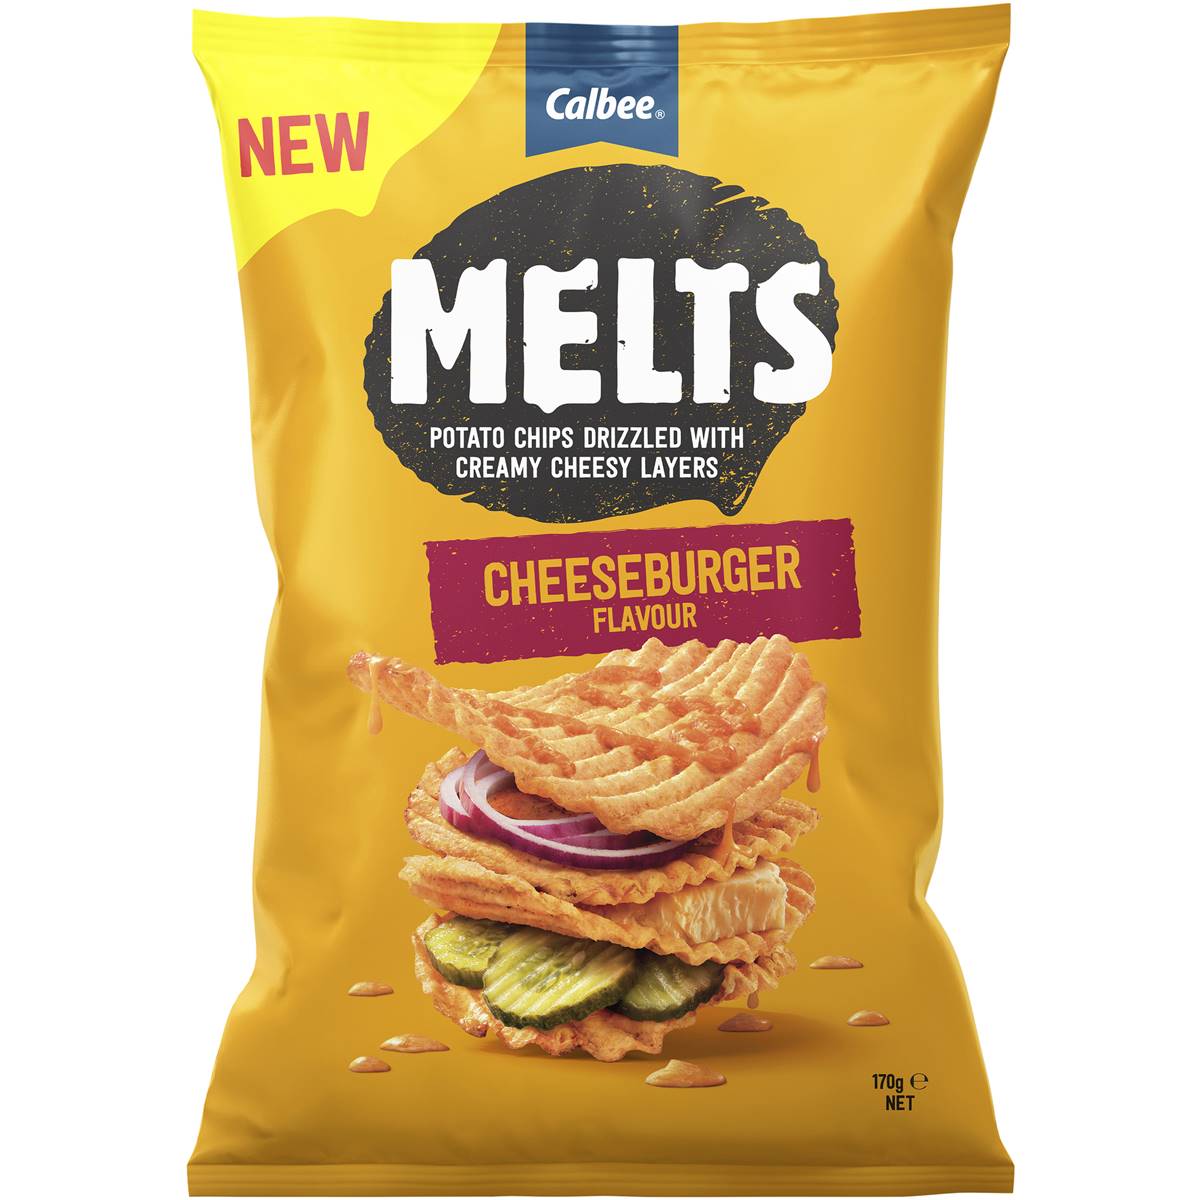 Calories in Calbee Melts Cheeseburger Flavour